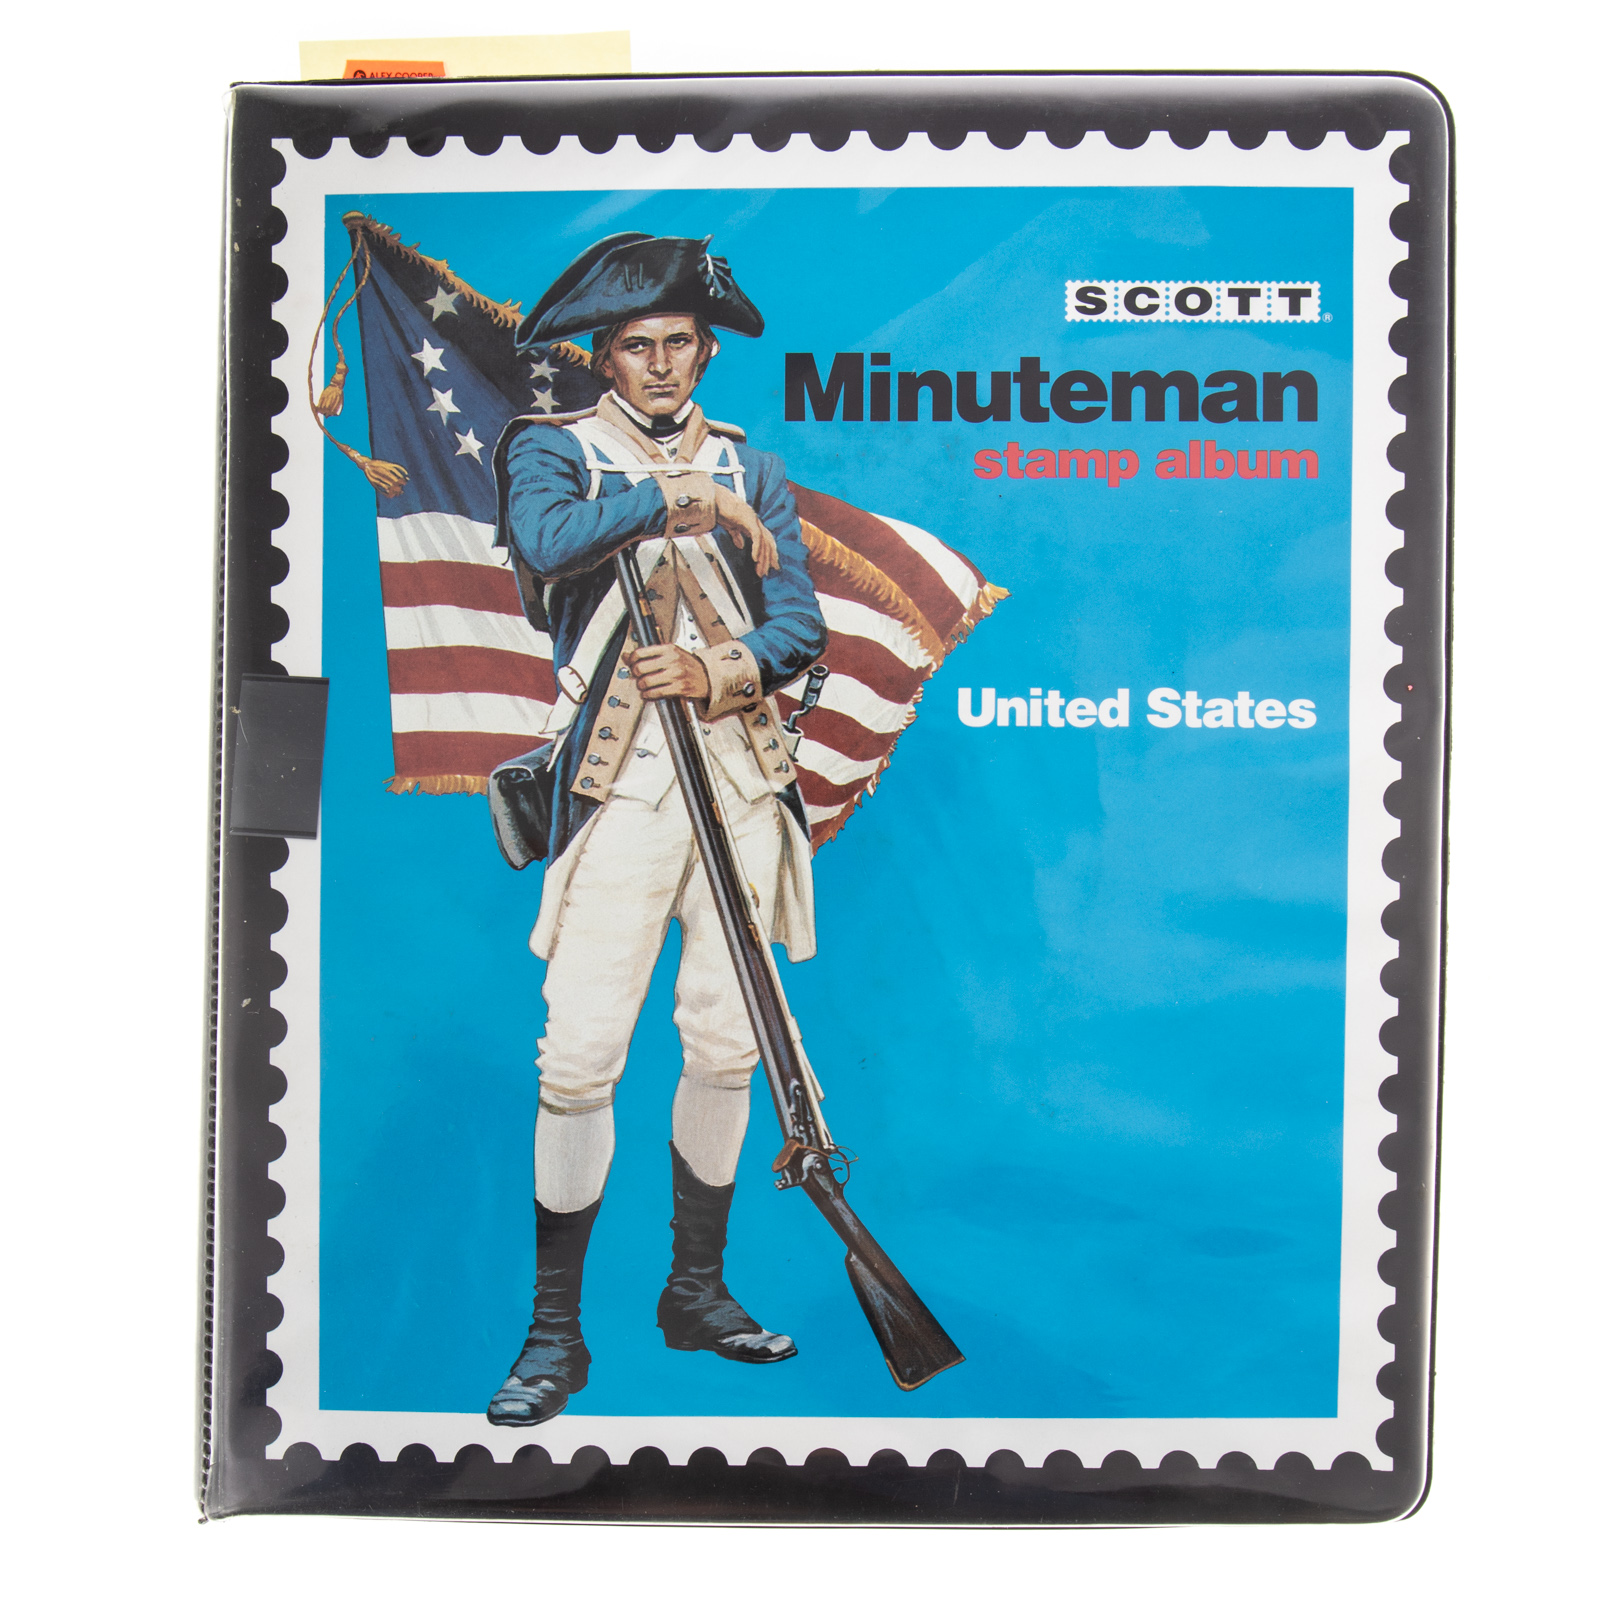 COLLECTION OF UNITED STATES POSTAGE 334a6b